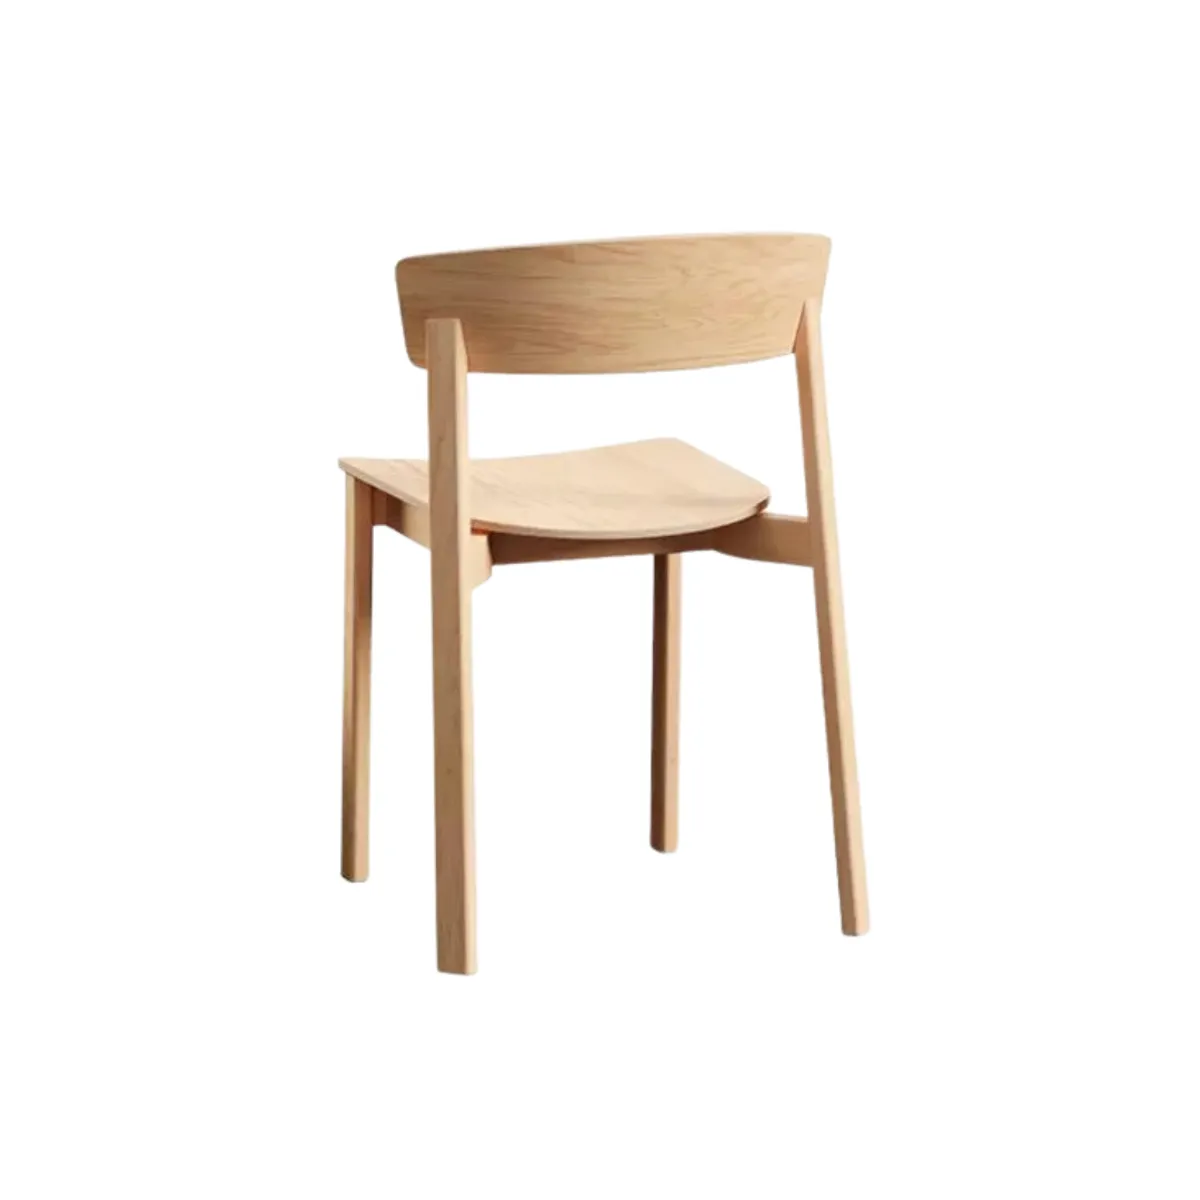 Forlan side chair 1